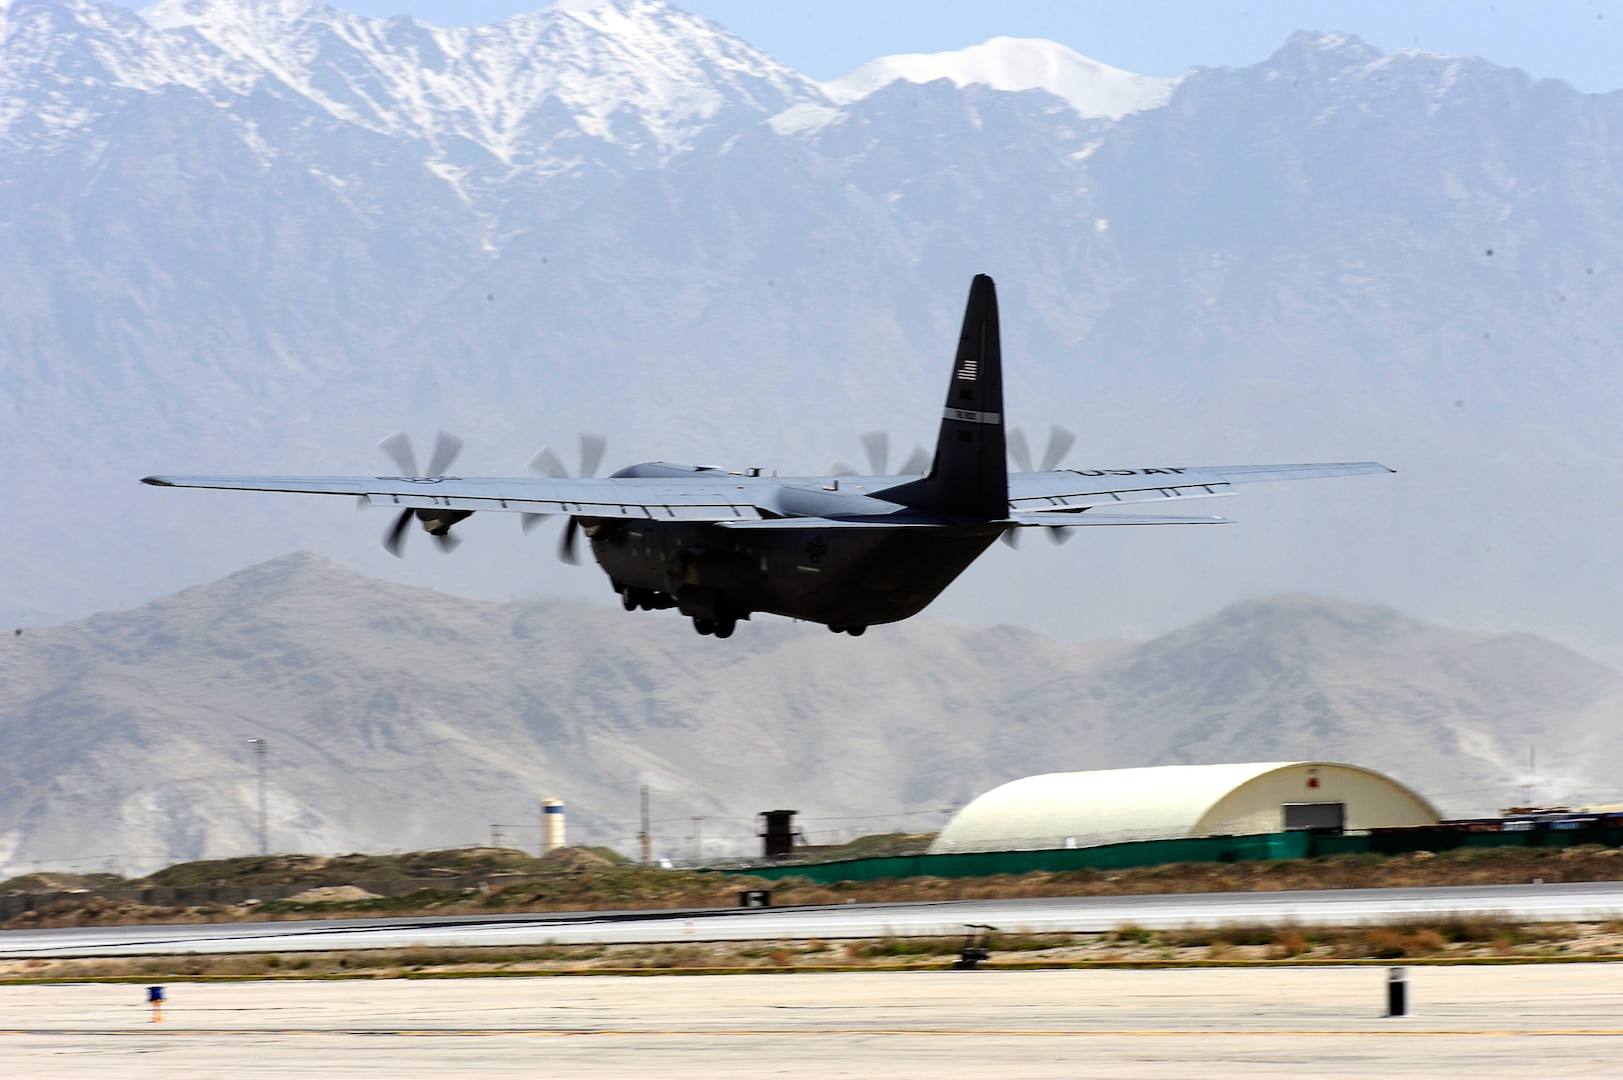 A C-130 Hercules aircraft assigned to the 774th Expeditionary Airlift Squadron launches from Bagram Airfield, Afghanistan. C-130s perform a variety of missions here including strategic airlift, aeromedical evacuation and people transport.